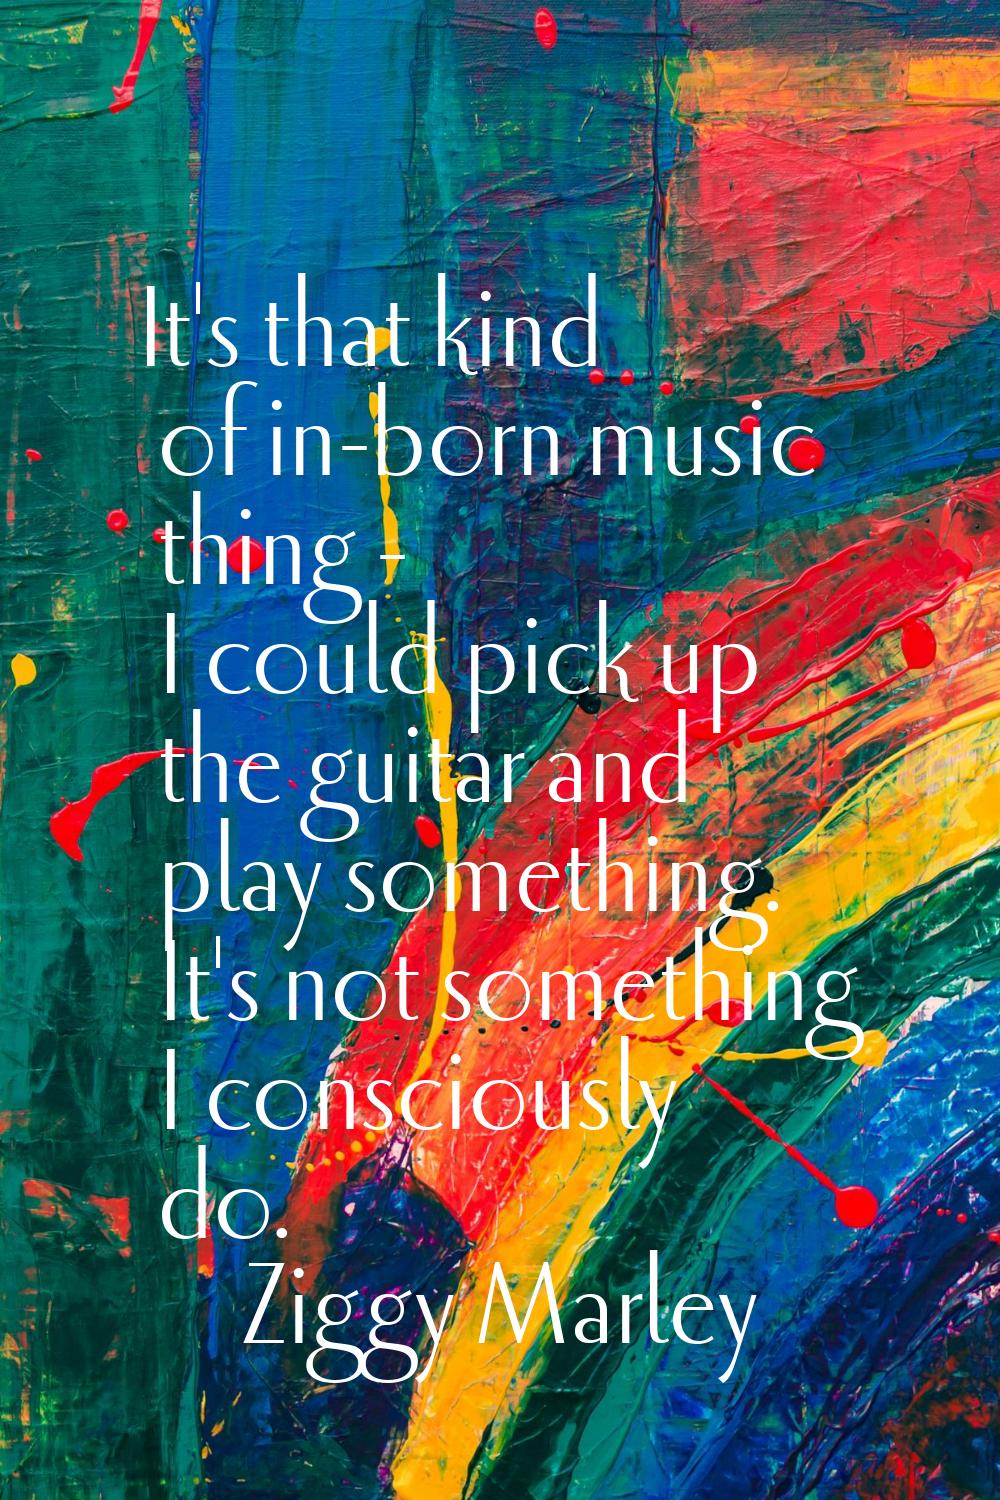 It's that kind of in-born music thing - I could pick up the guitar and play something. It's not som